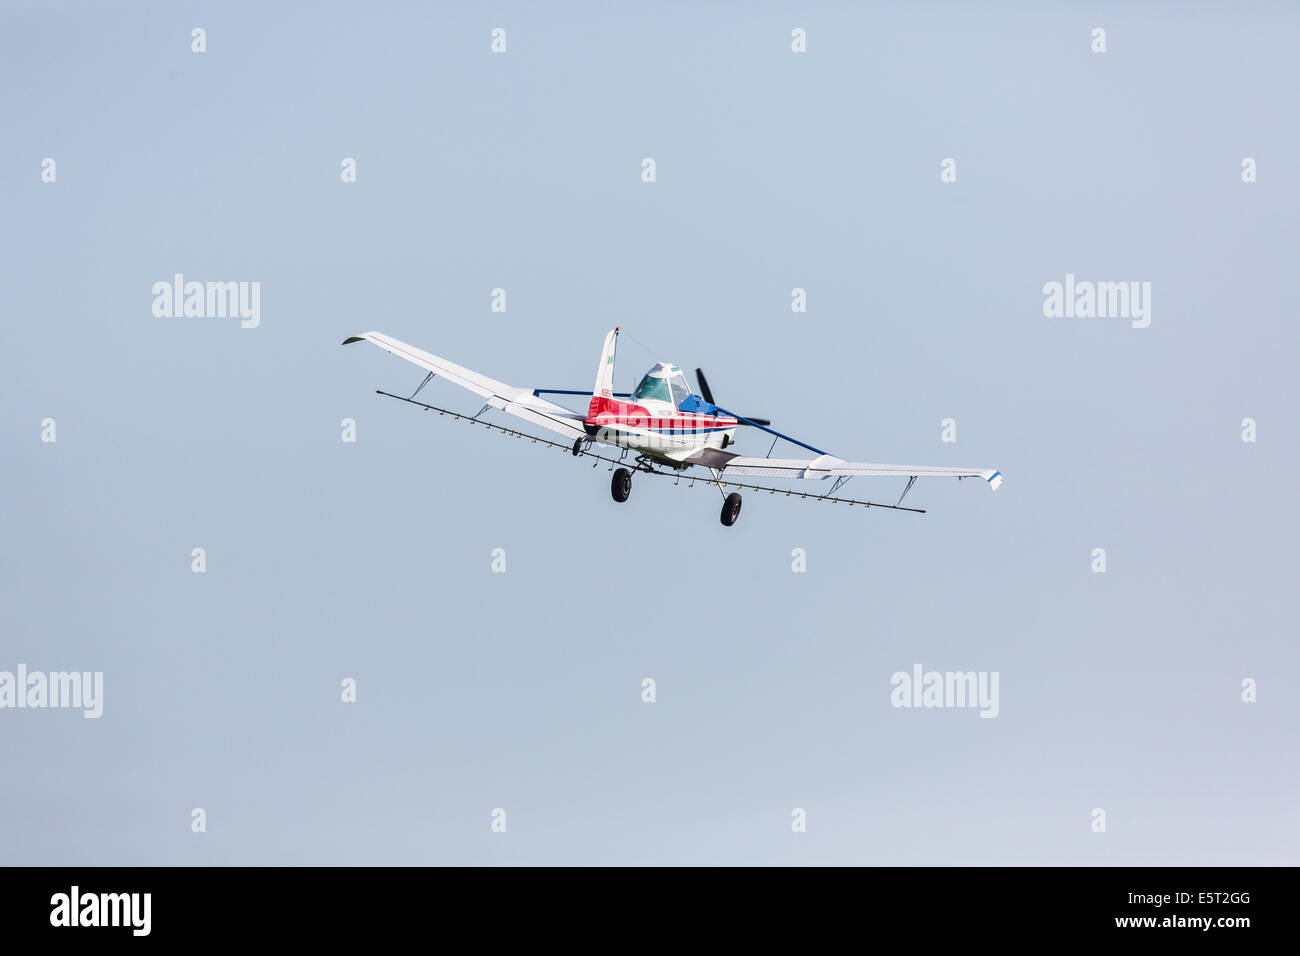 Aircraft used in agriculture to apply fungicides and pesticides, Crop spraying. Stock Photo